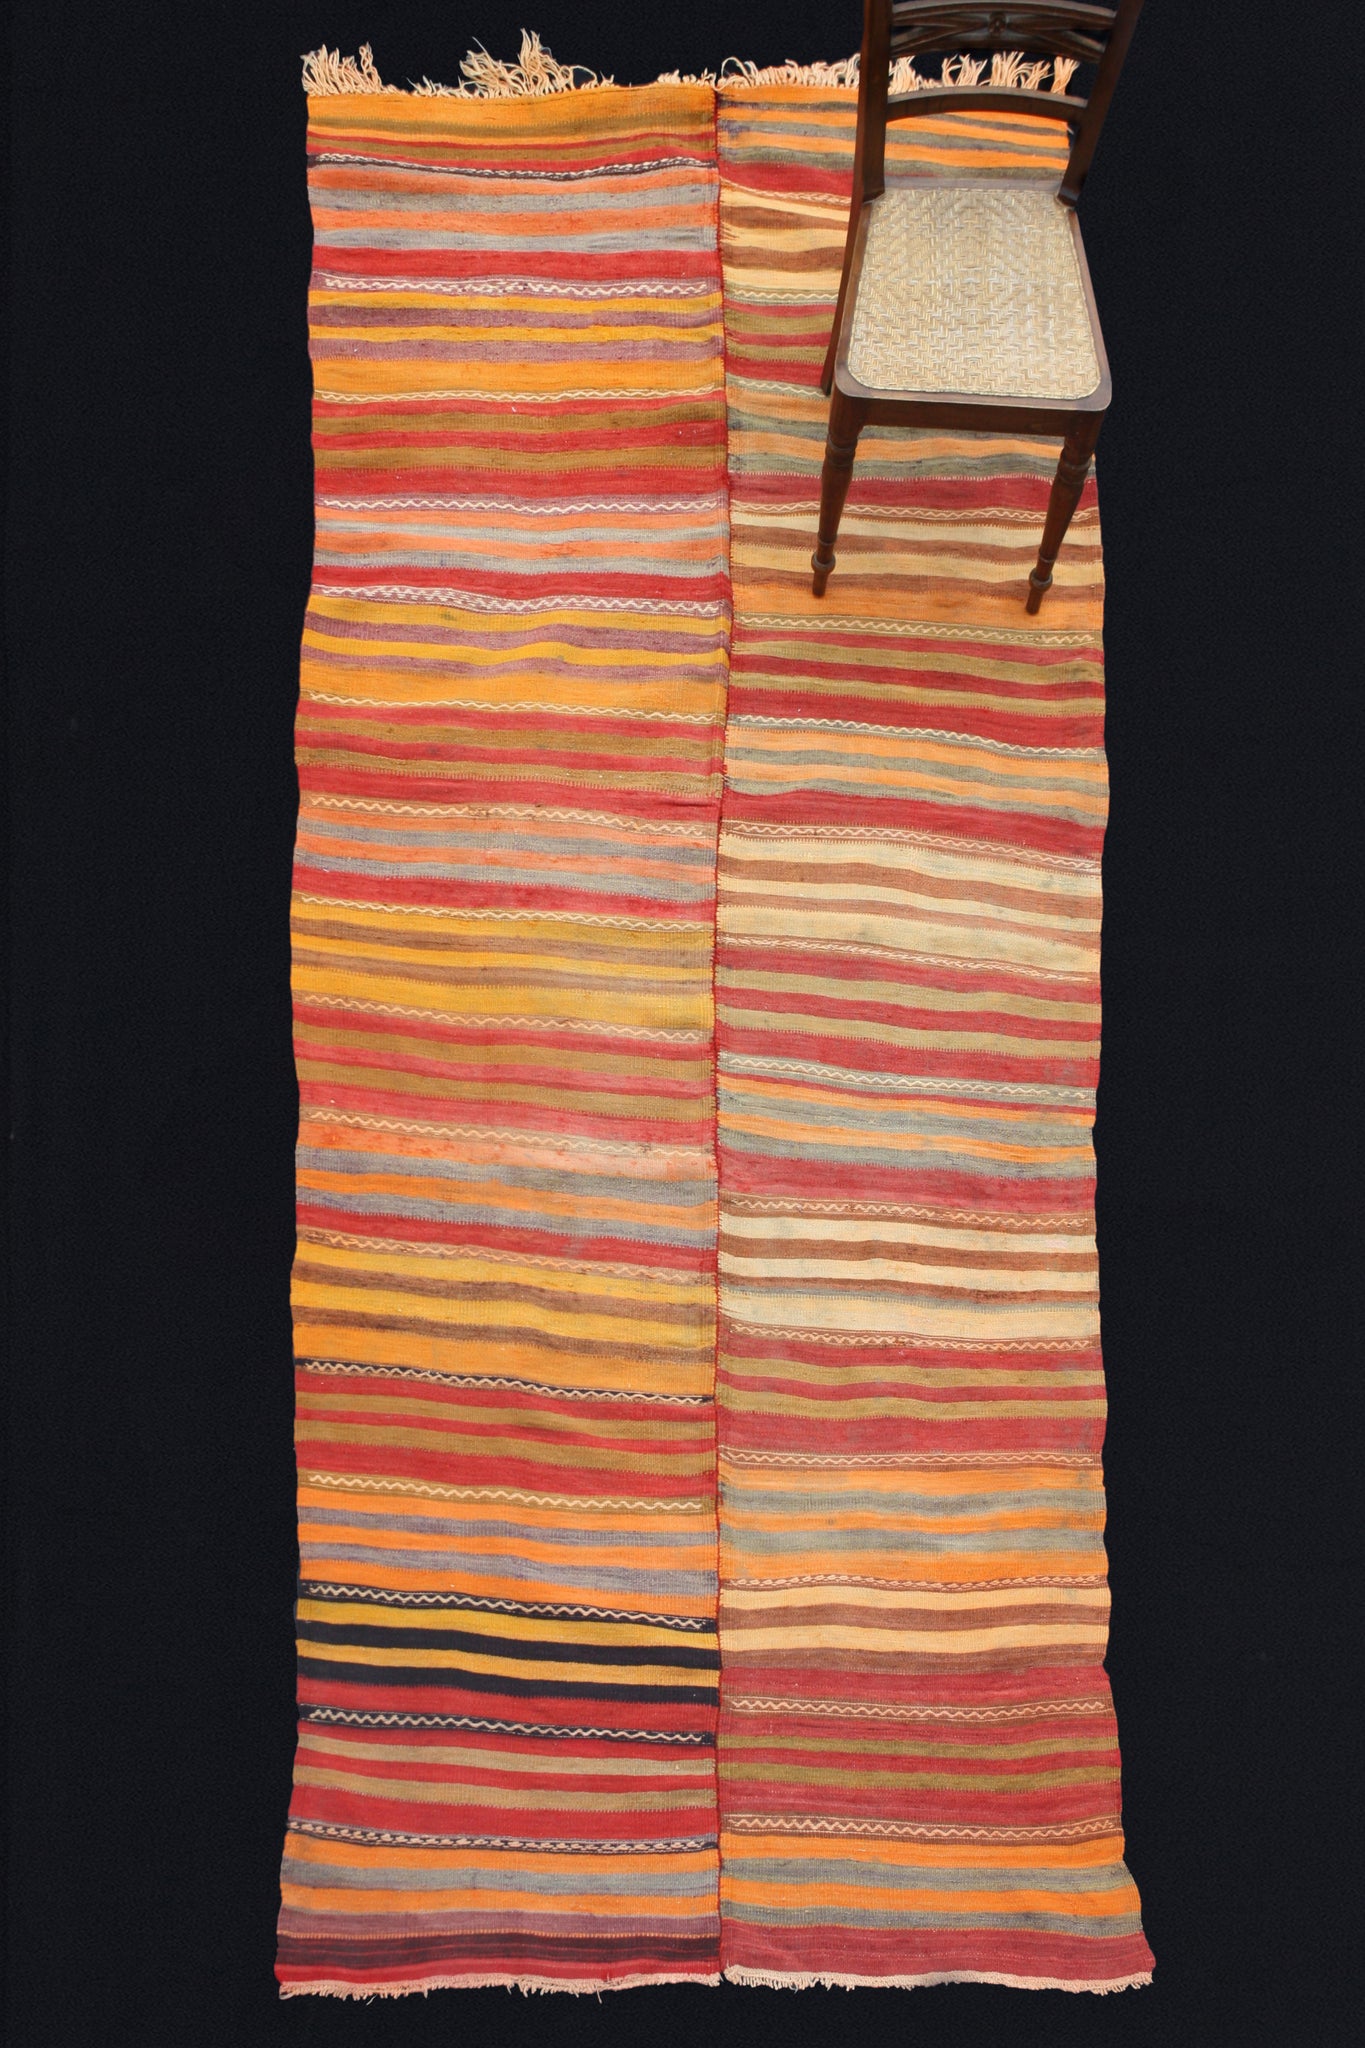 Anatolian Kilim With Red, Yellow And Blue Stripes (4' 9" x 11' 4")